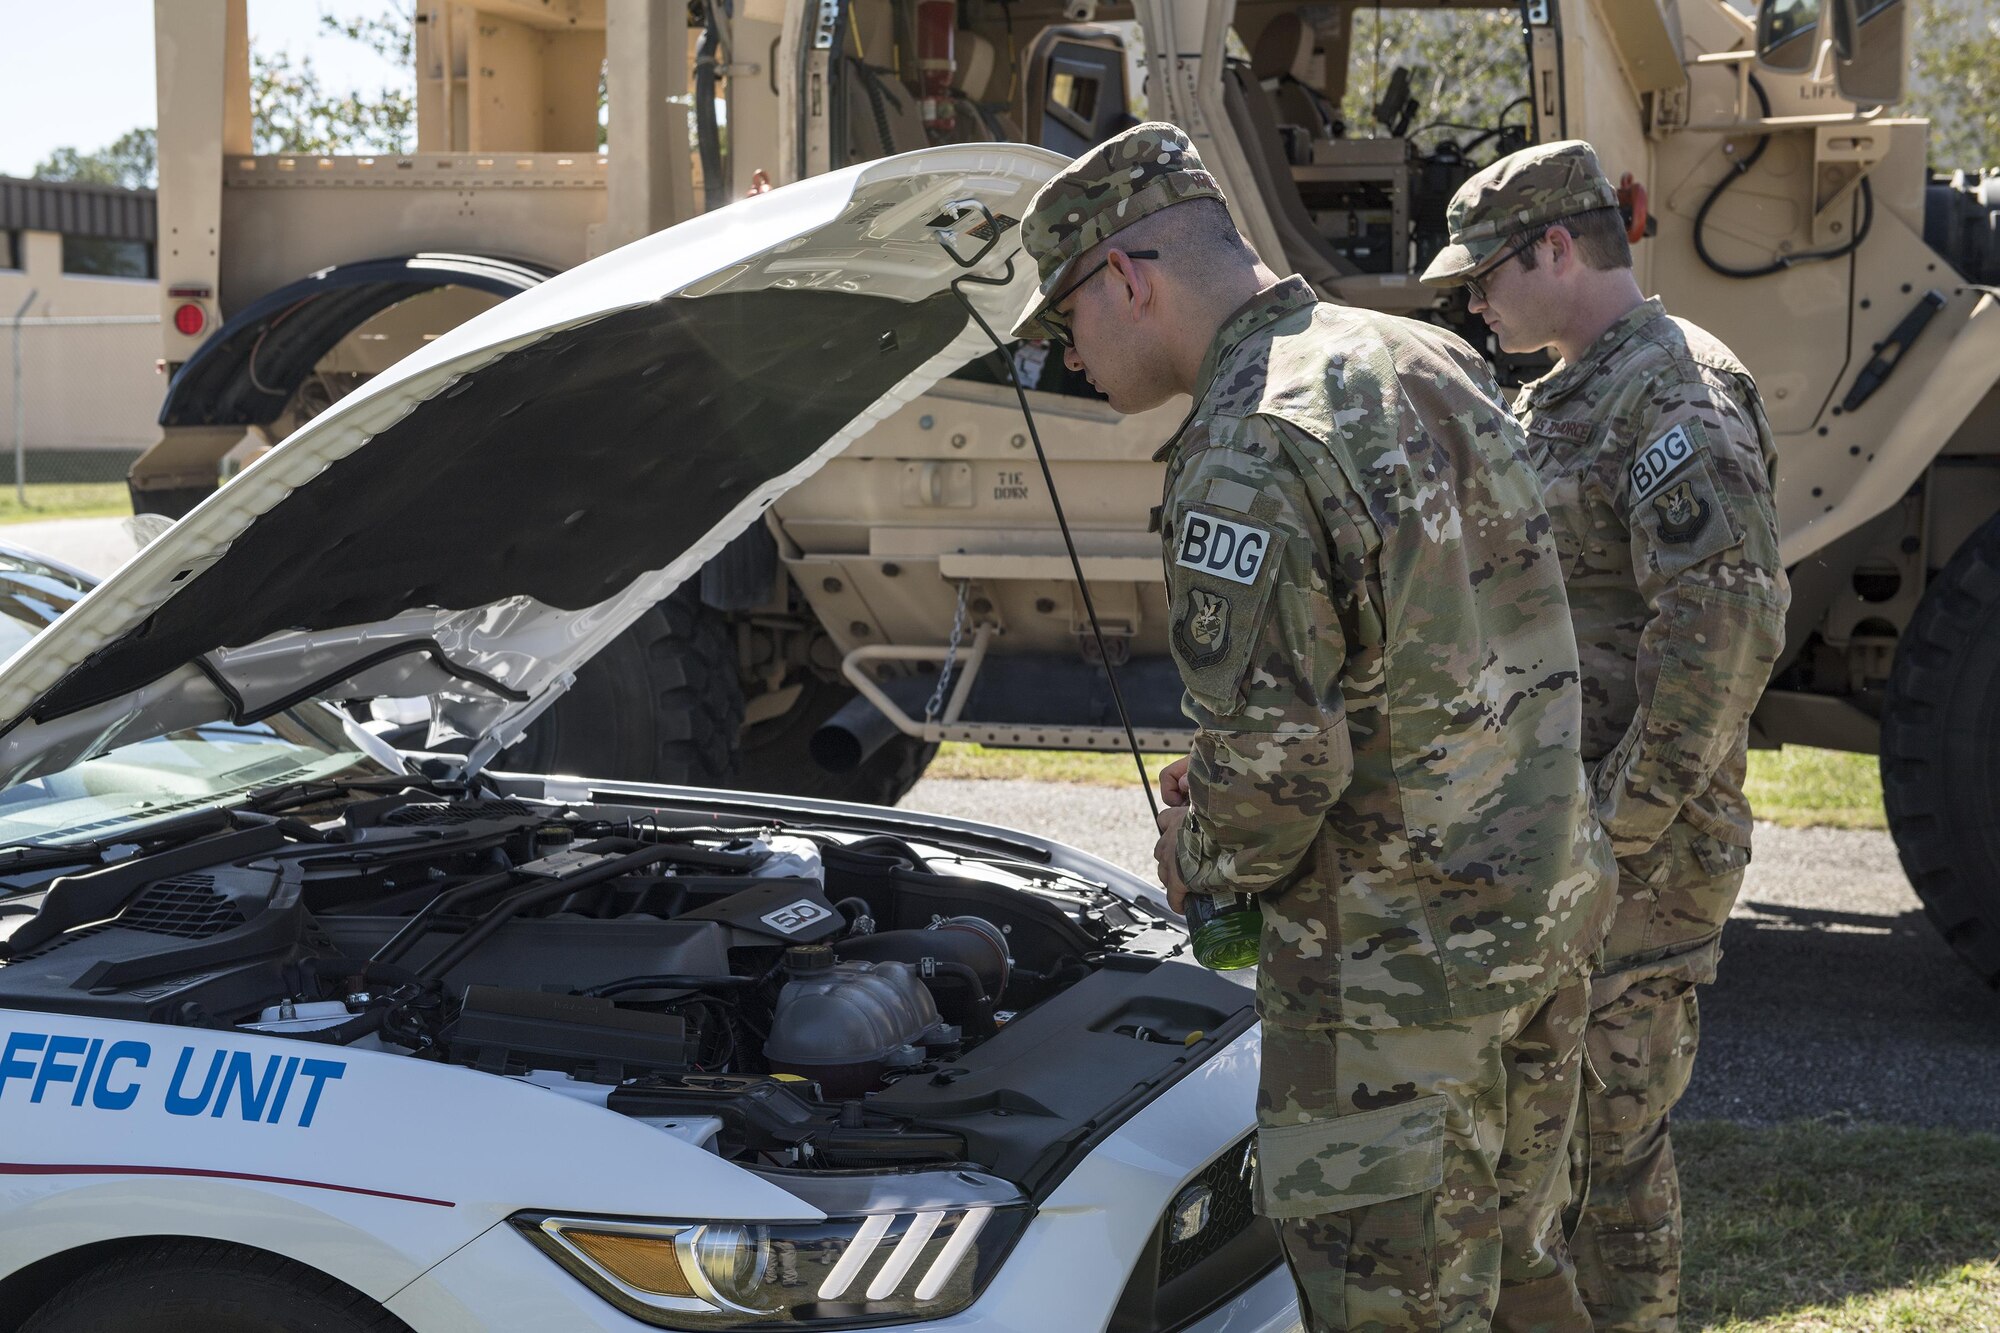 Airmen from the 820th Base Defense Group look at the engine of a local police car during the Police Week car show, May 16, 2017, at Moody Air Force Base, Ga. Different law enforcement vehicles were put on display for attendees to climb in and ask questions about. (U.S. Air Force photo Senior Airman Janiqua P. Robinson)